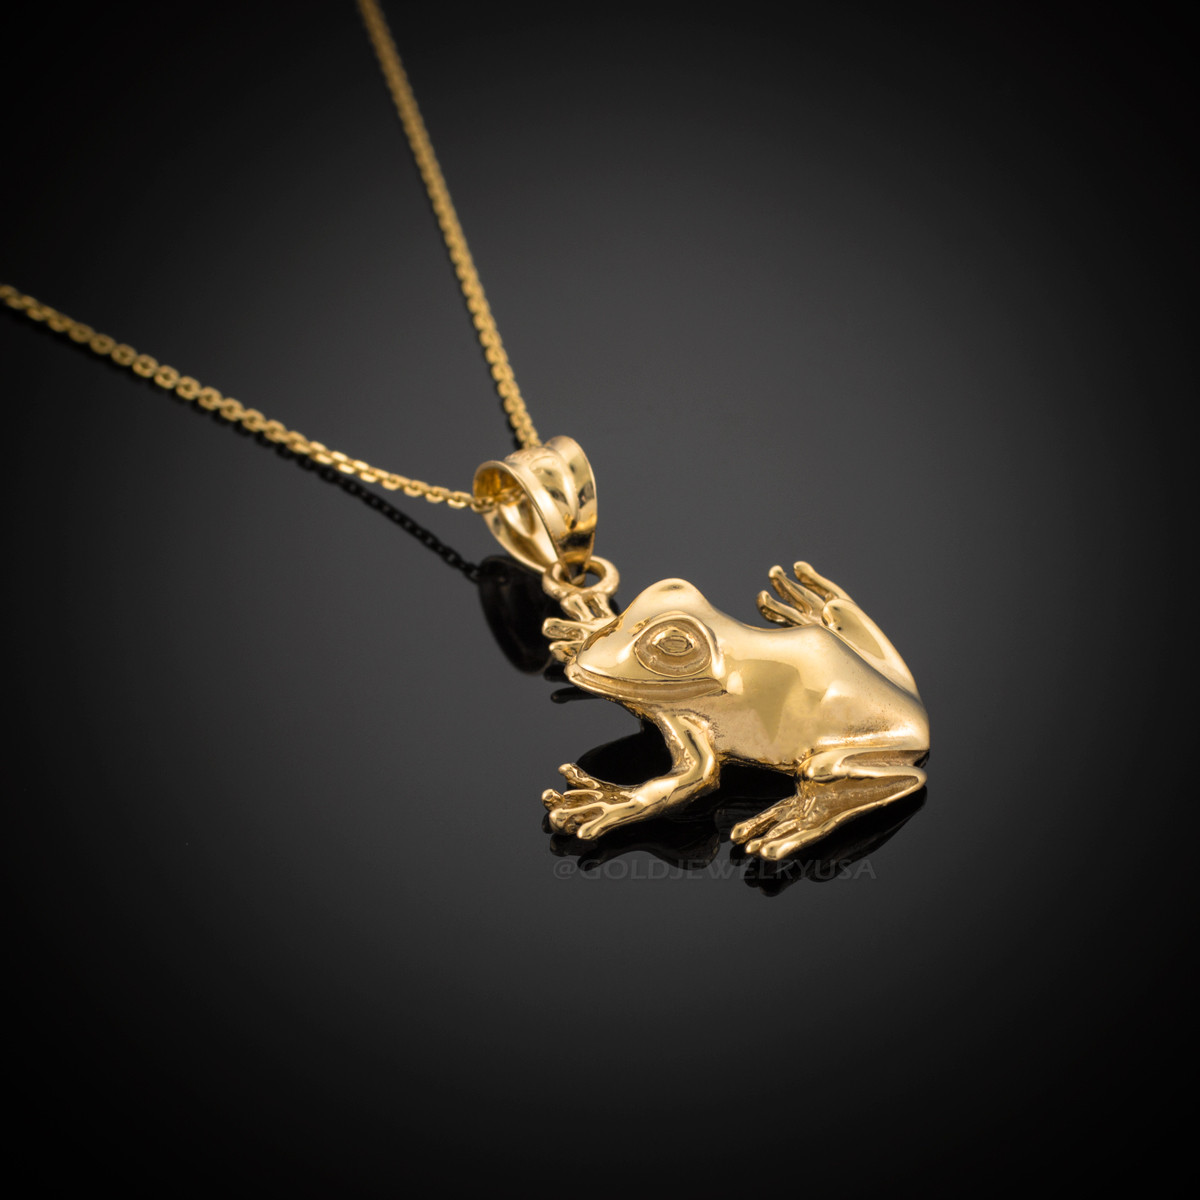 Buy 14K Yellow Gold Frog Pendant Necklace Online in India - Etsy